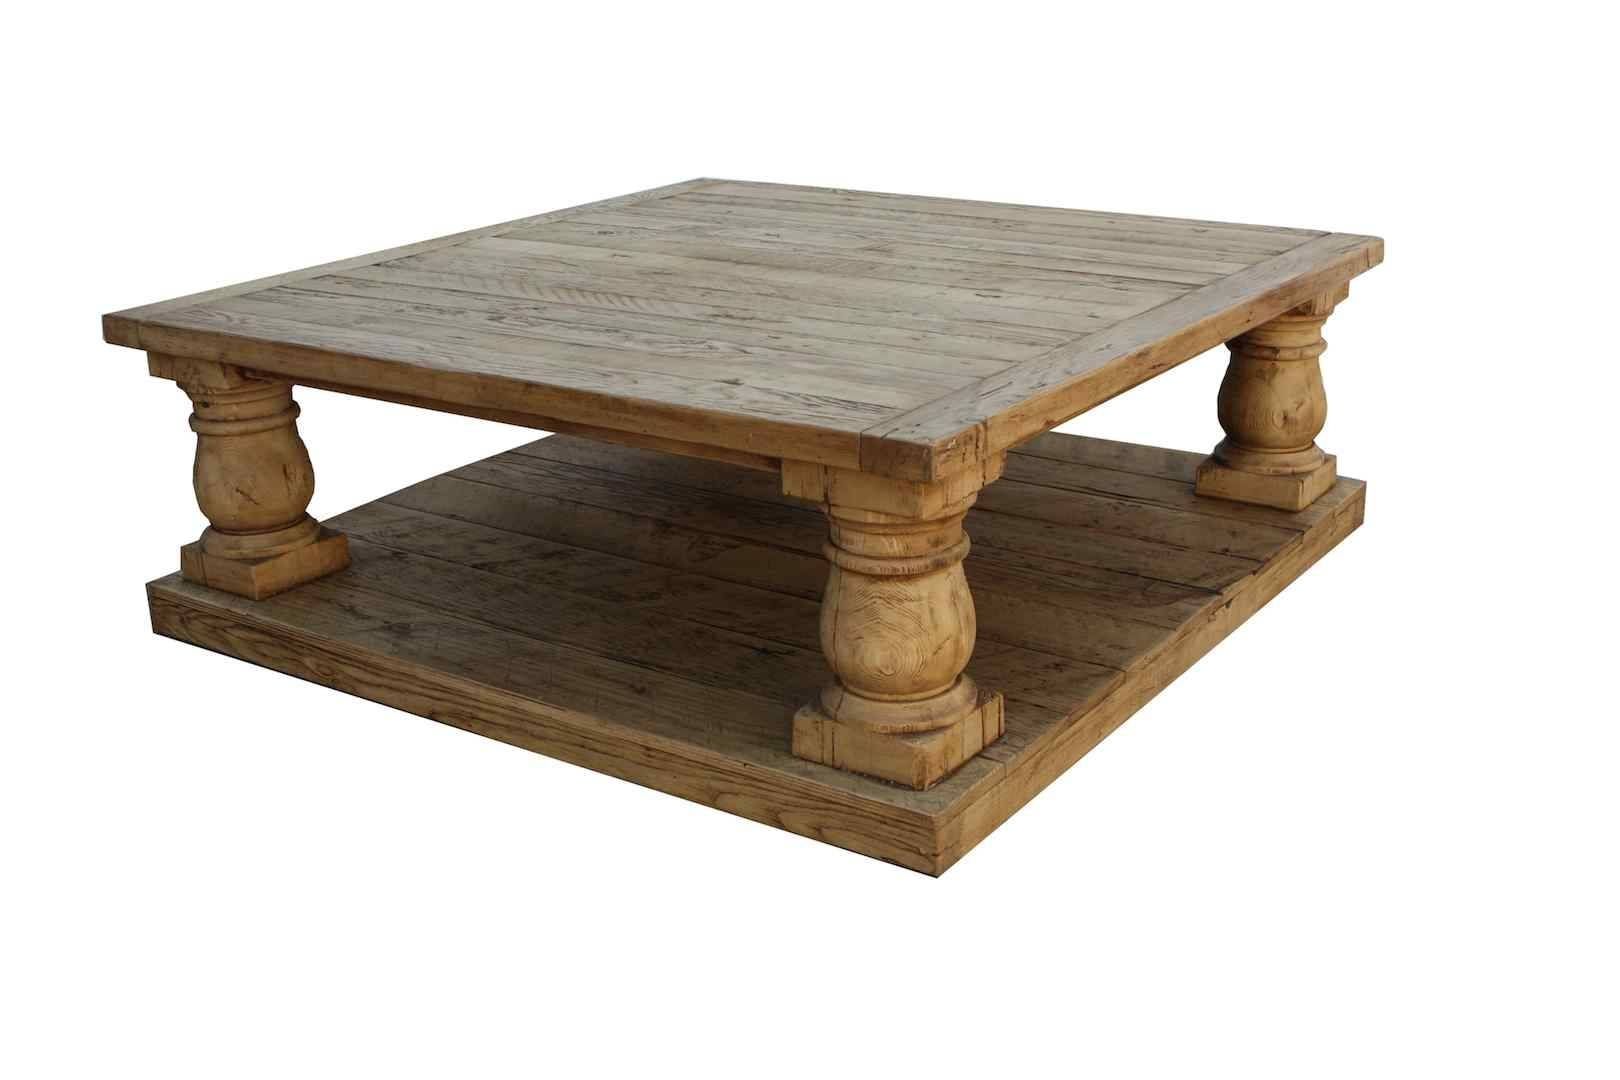 Rustic Reclaimed Wood Coffee Table | Design Ideas & Decors For Large Rustic Coffee Tables (View 11 of 15)